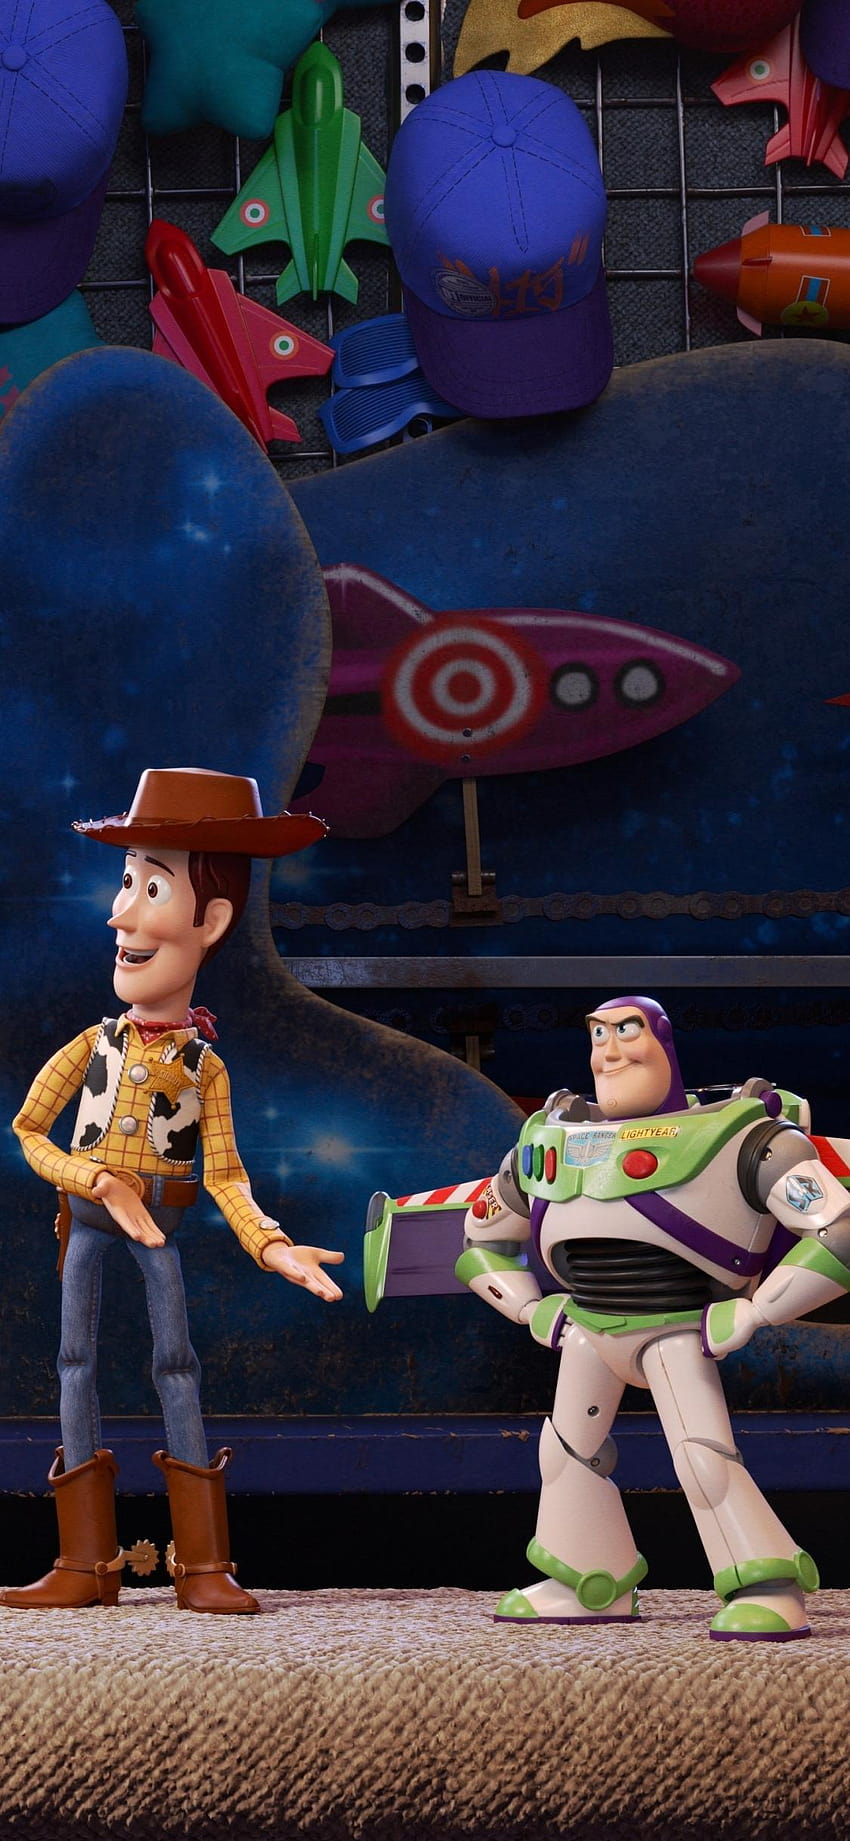 1125x2436 toy story 4, woody, buzz, toy story iphone HD phone wallpaper